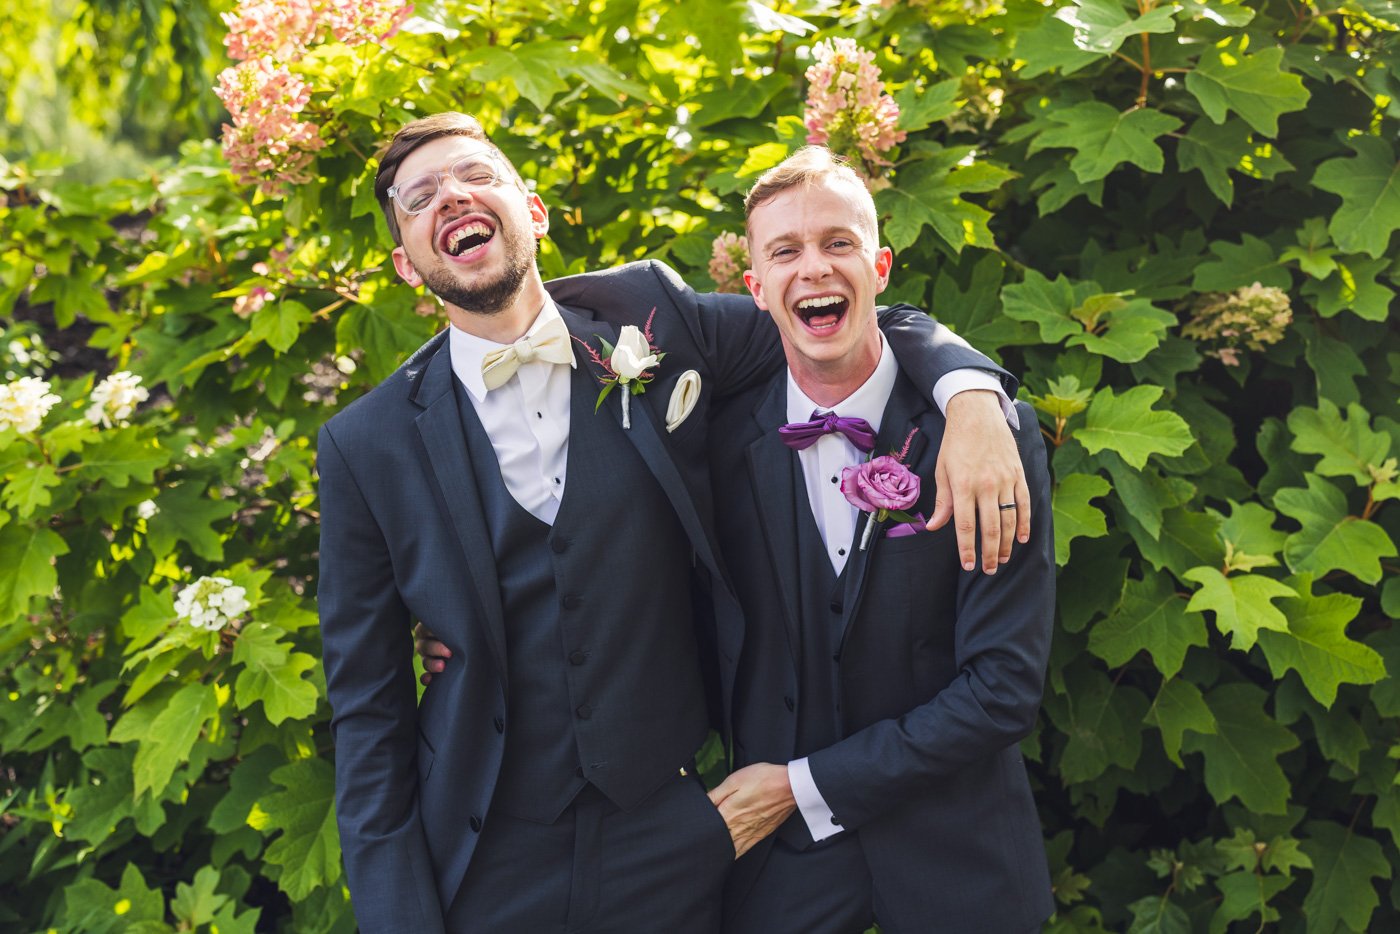 groom with arms around groomsman while both laugh